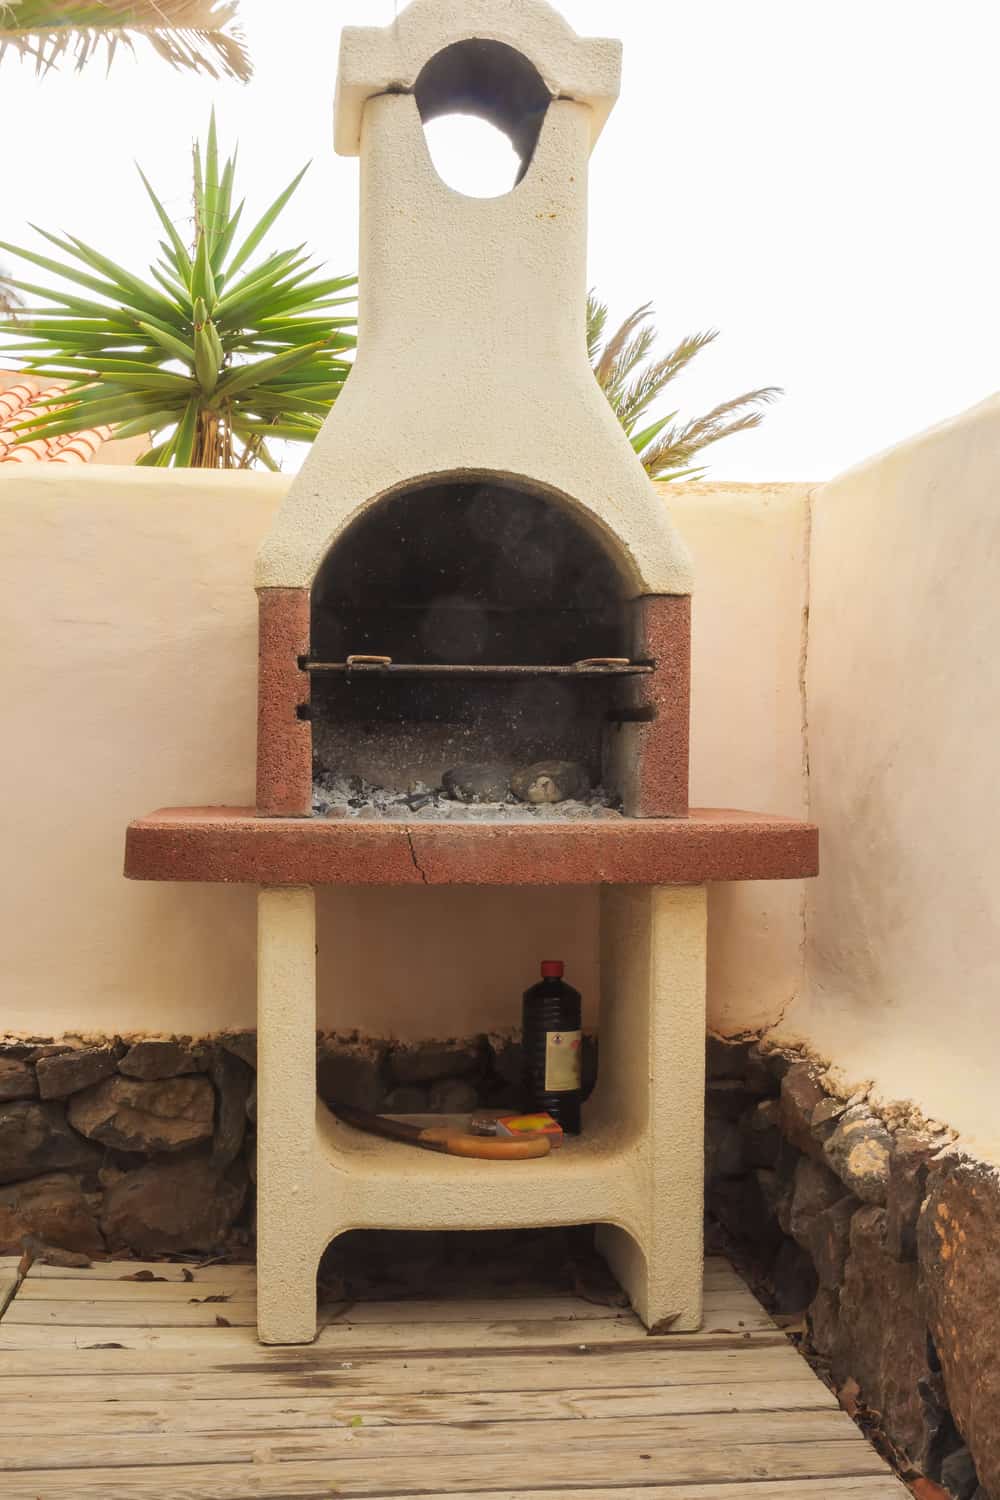 19 Homemade Brick Barbecue Plans You Can Build Easily